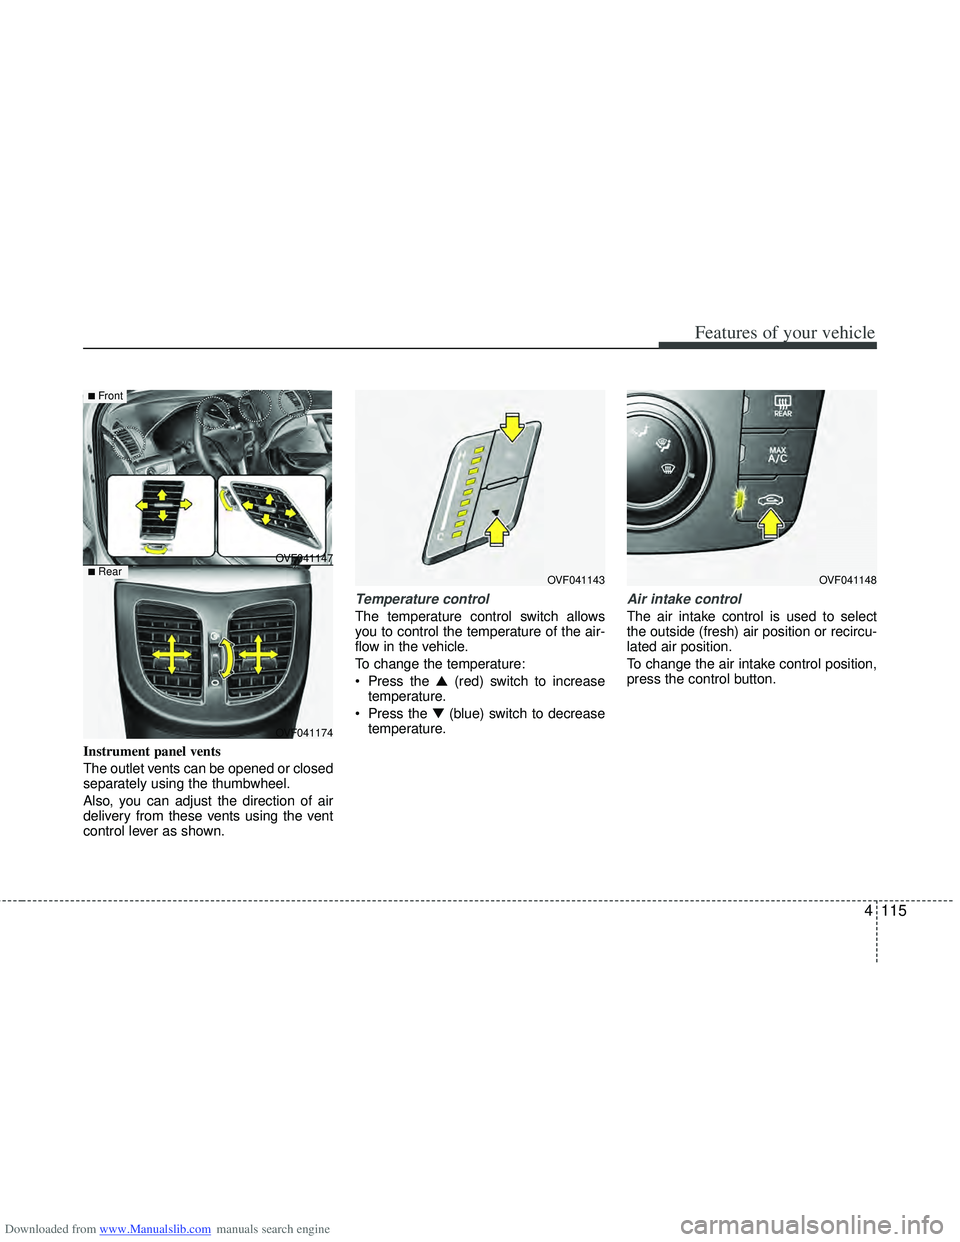 HYUNDAI I40 2011  Owners Manual Downloaded from www.Manualslib.com manuals search engine 4115
Features of your vehicle
Instrument panel vents
The outlet vents can be opened or closed
separately using the thumbwheel.
Also, you can ad